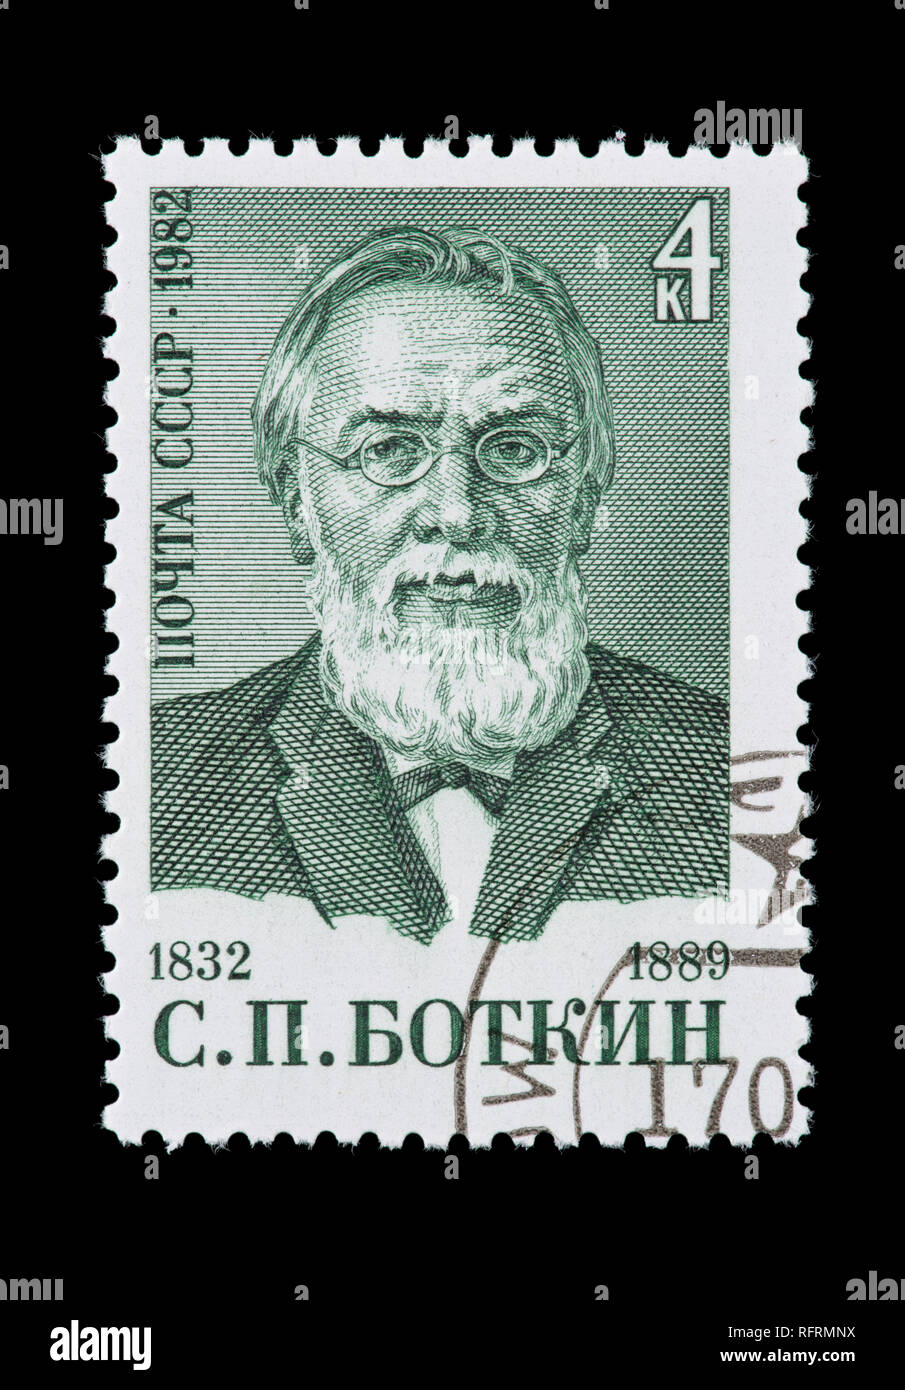 Postage stamp from the Soviet Union (USSR) depicting S. P. Botkin, physician. Stock Photo